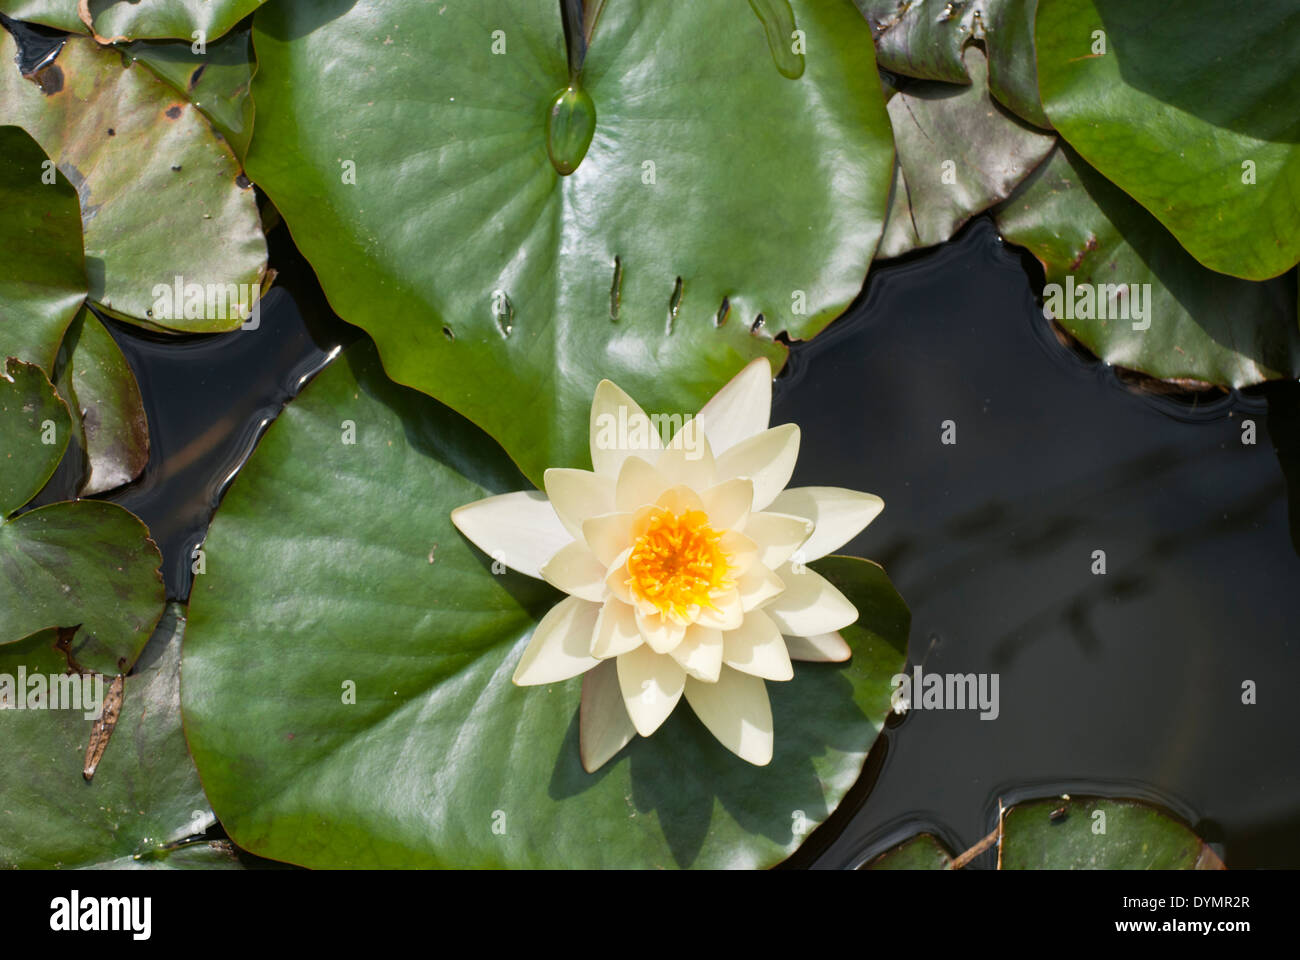 Water lily, single flower Stock Photo